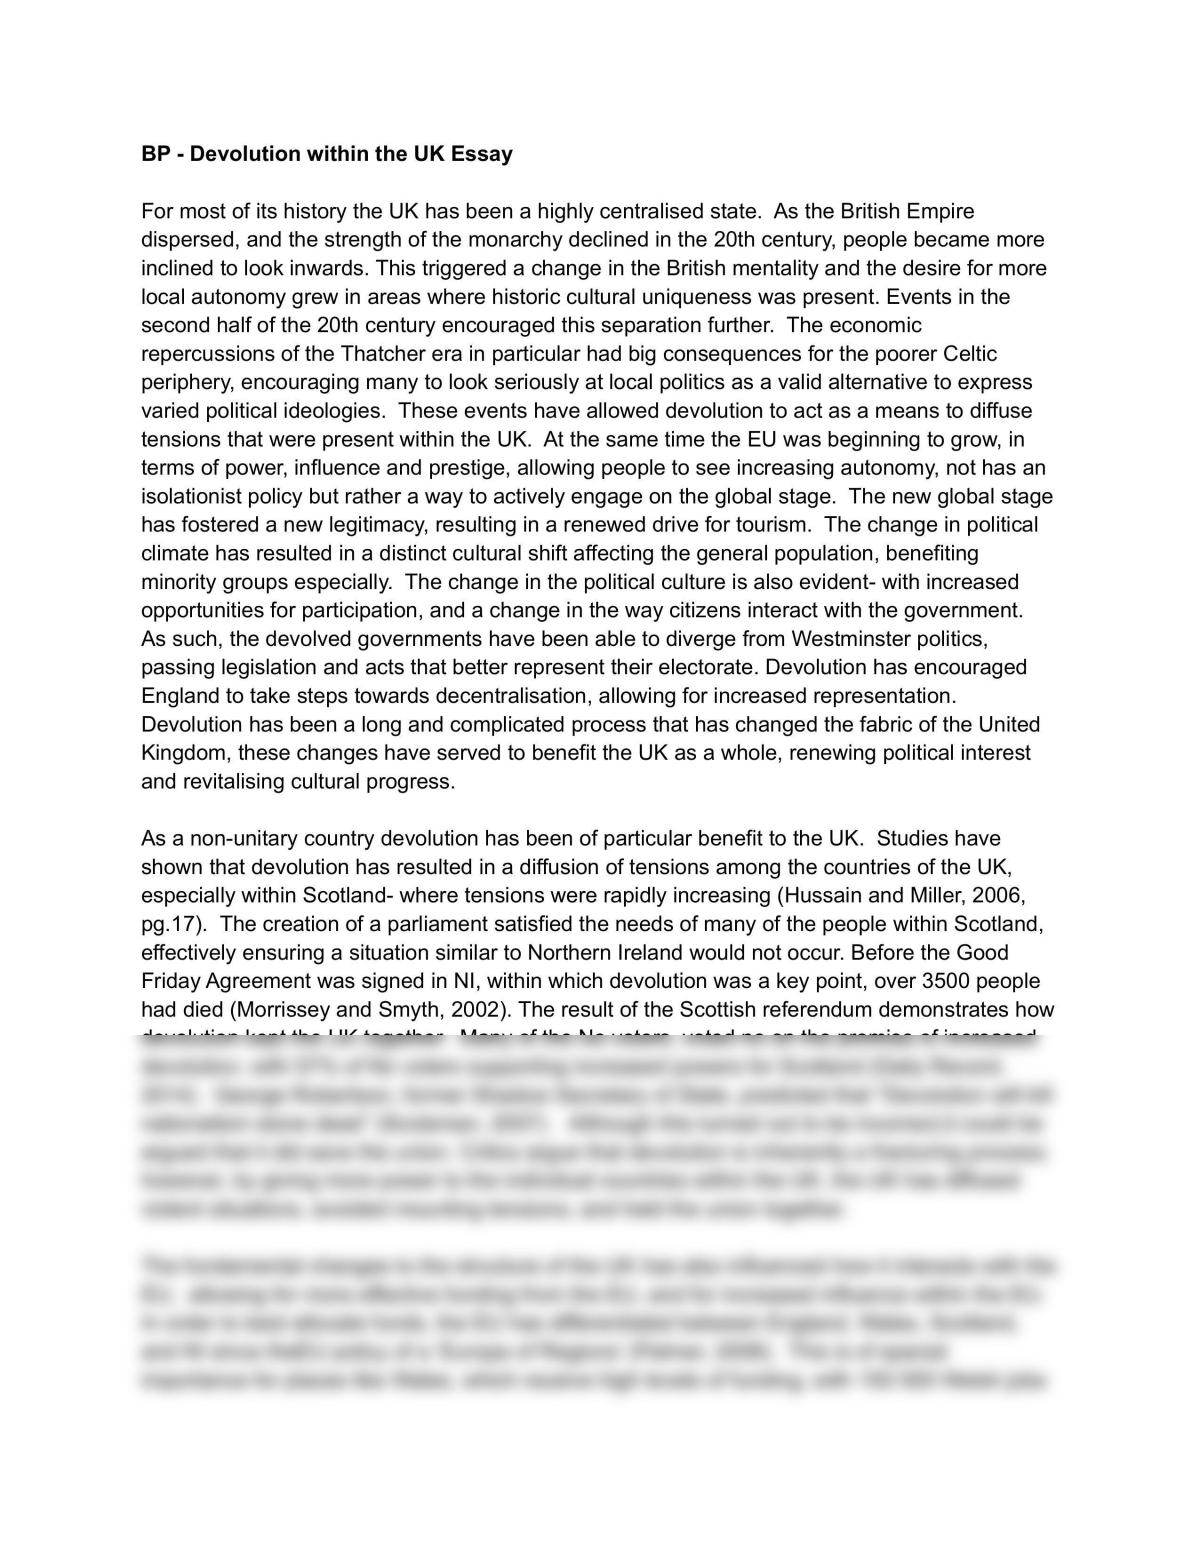 Devolution within the EU Essay - Page 1